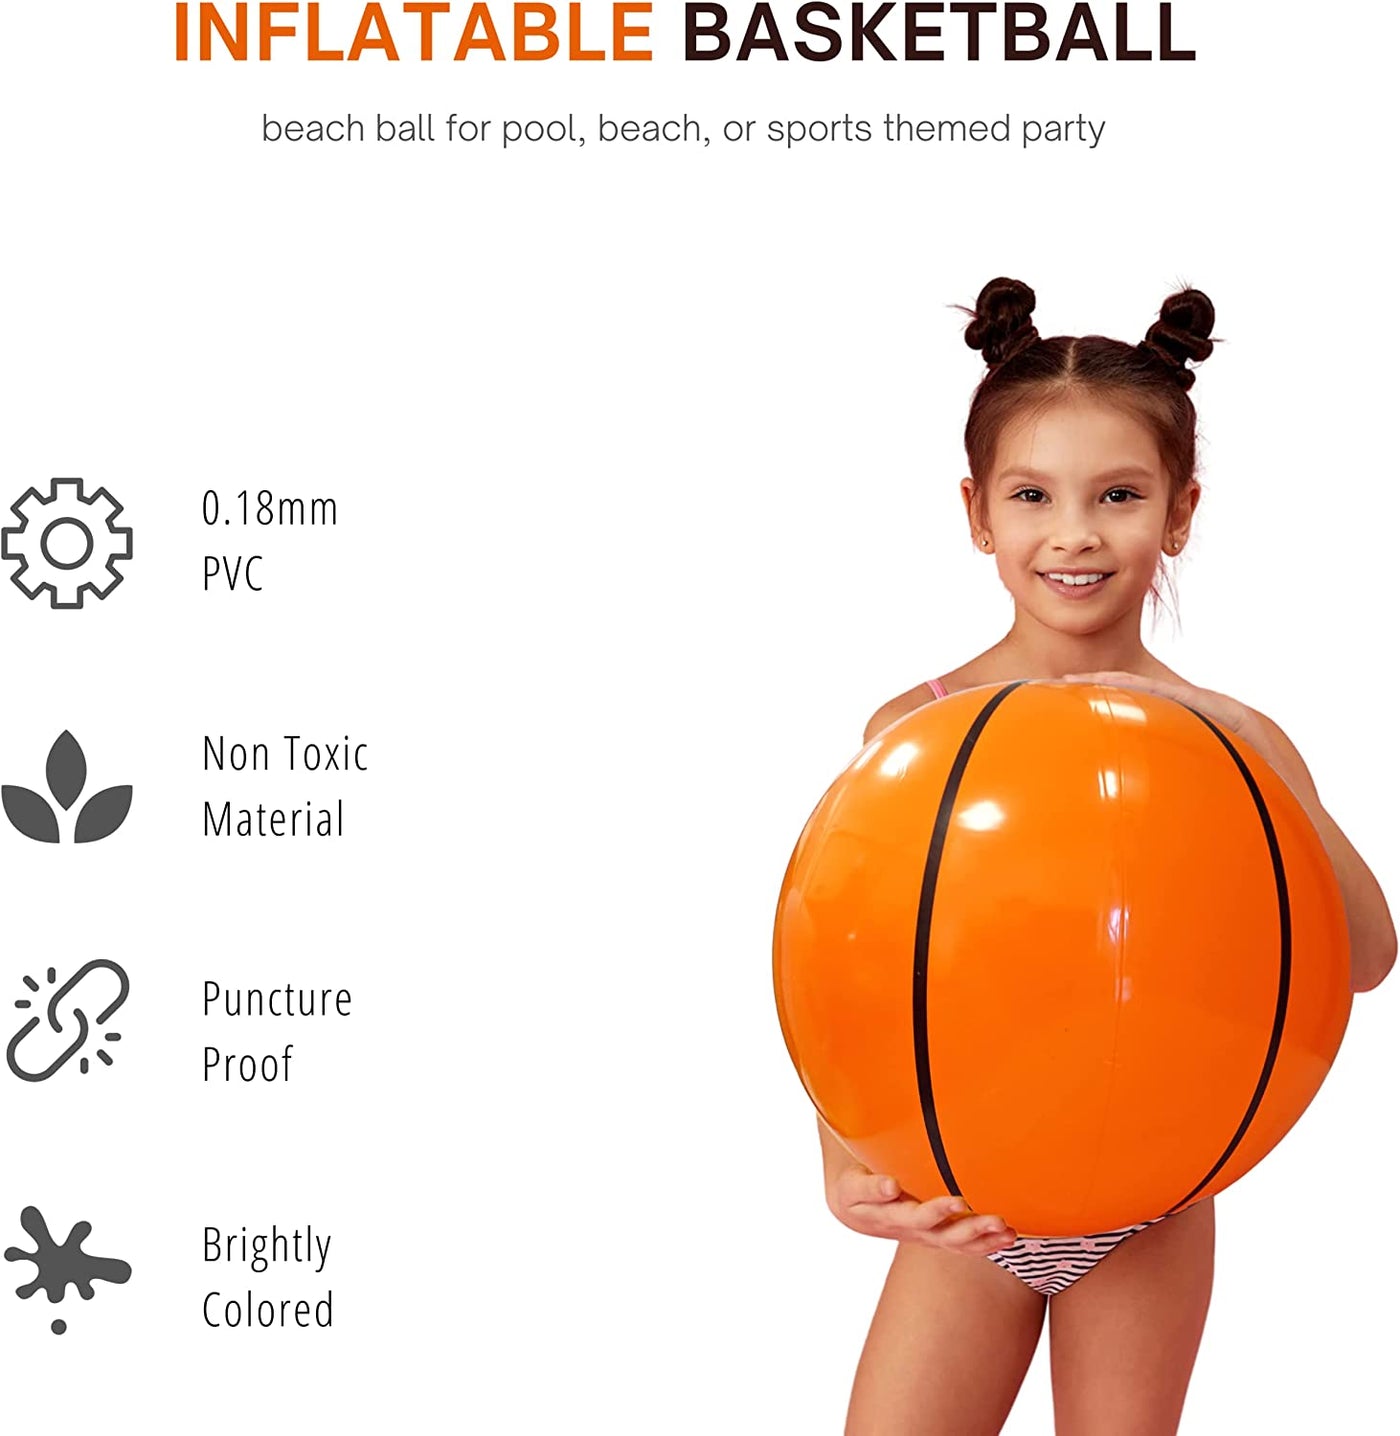 4E's Novelty 20" Inflatable Basketball [3 Pack] Large Basketball Beach Ball for Sports Themed Basketball Party Decorations & Favors, Indoor Games & Toys for Kids